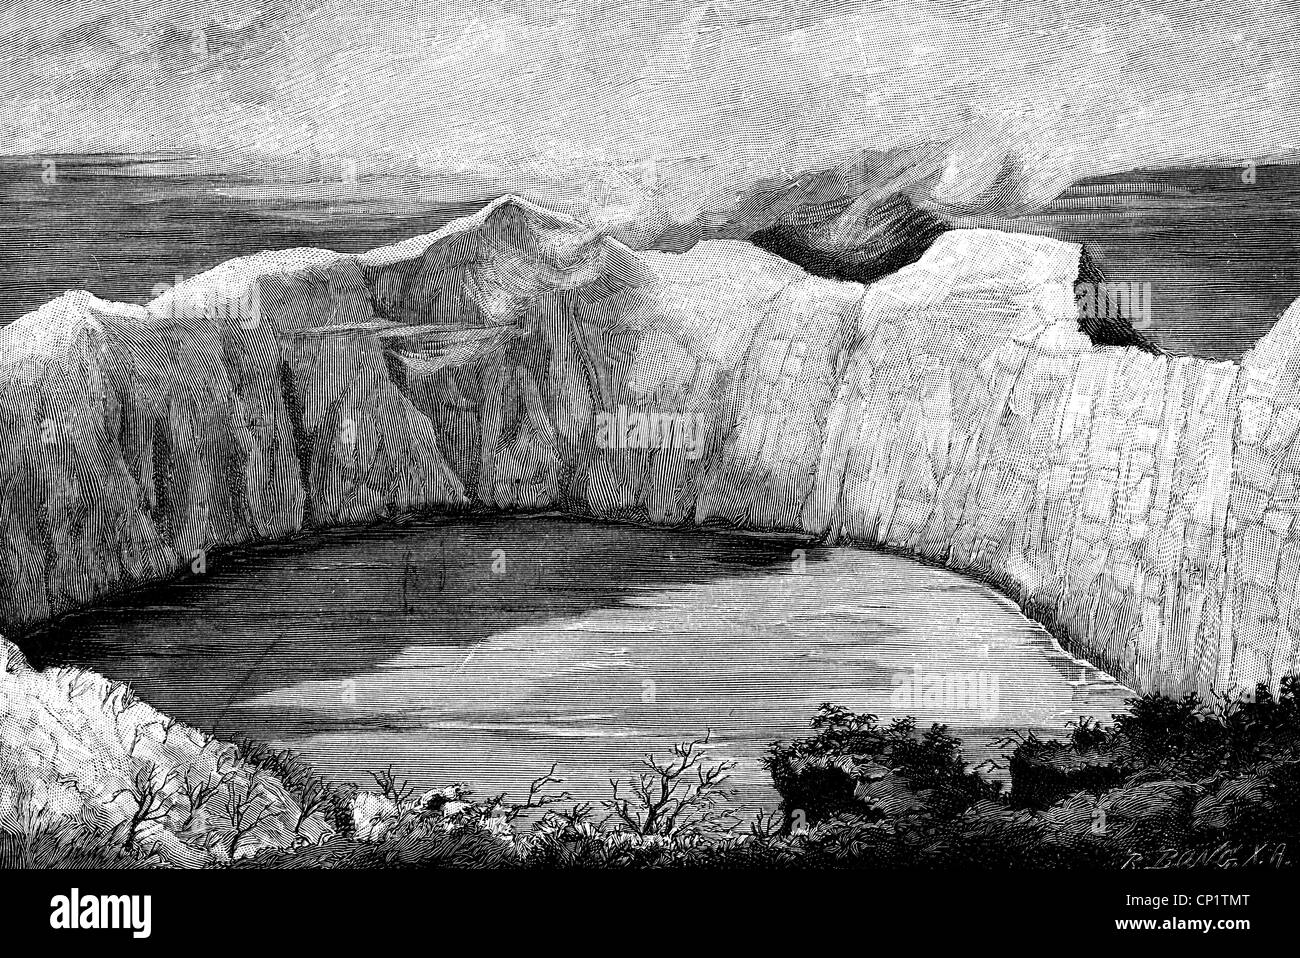 geography / travel, Saint Vincent and the Grenadines, lakes, krater lake of volcano Soufriere, St. Vincent, view, wood engraving, 19th century, landscape, volcanism, Caribbean, West Indies, Lesser Antilles, island, America, historic, historical, Additional-Rights-Clearences-Not Available Stock Photo